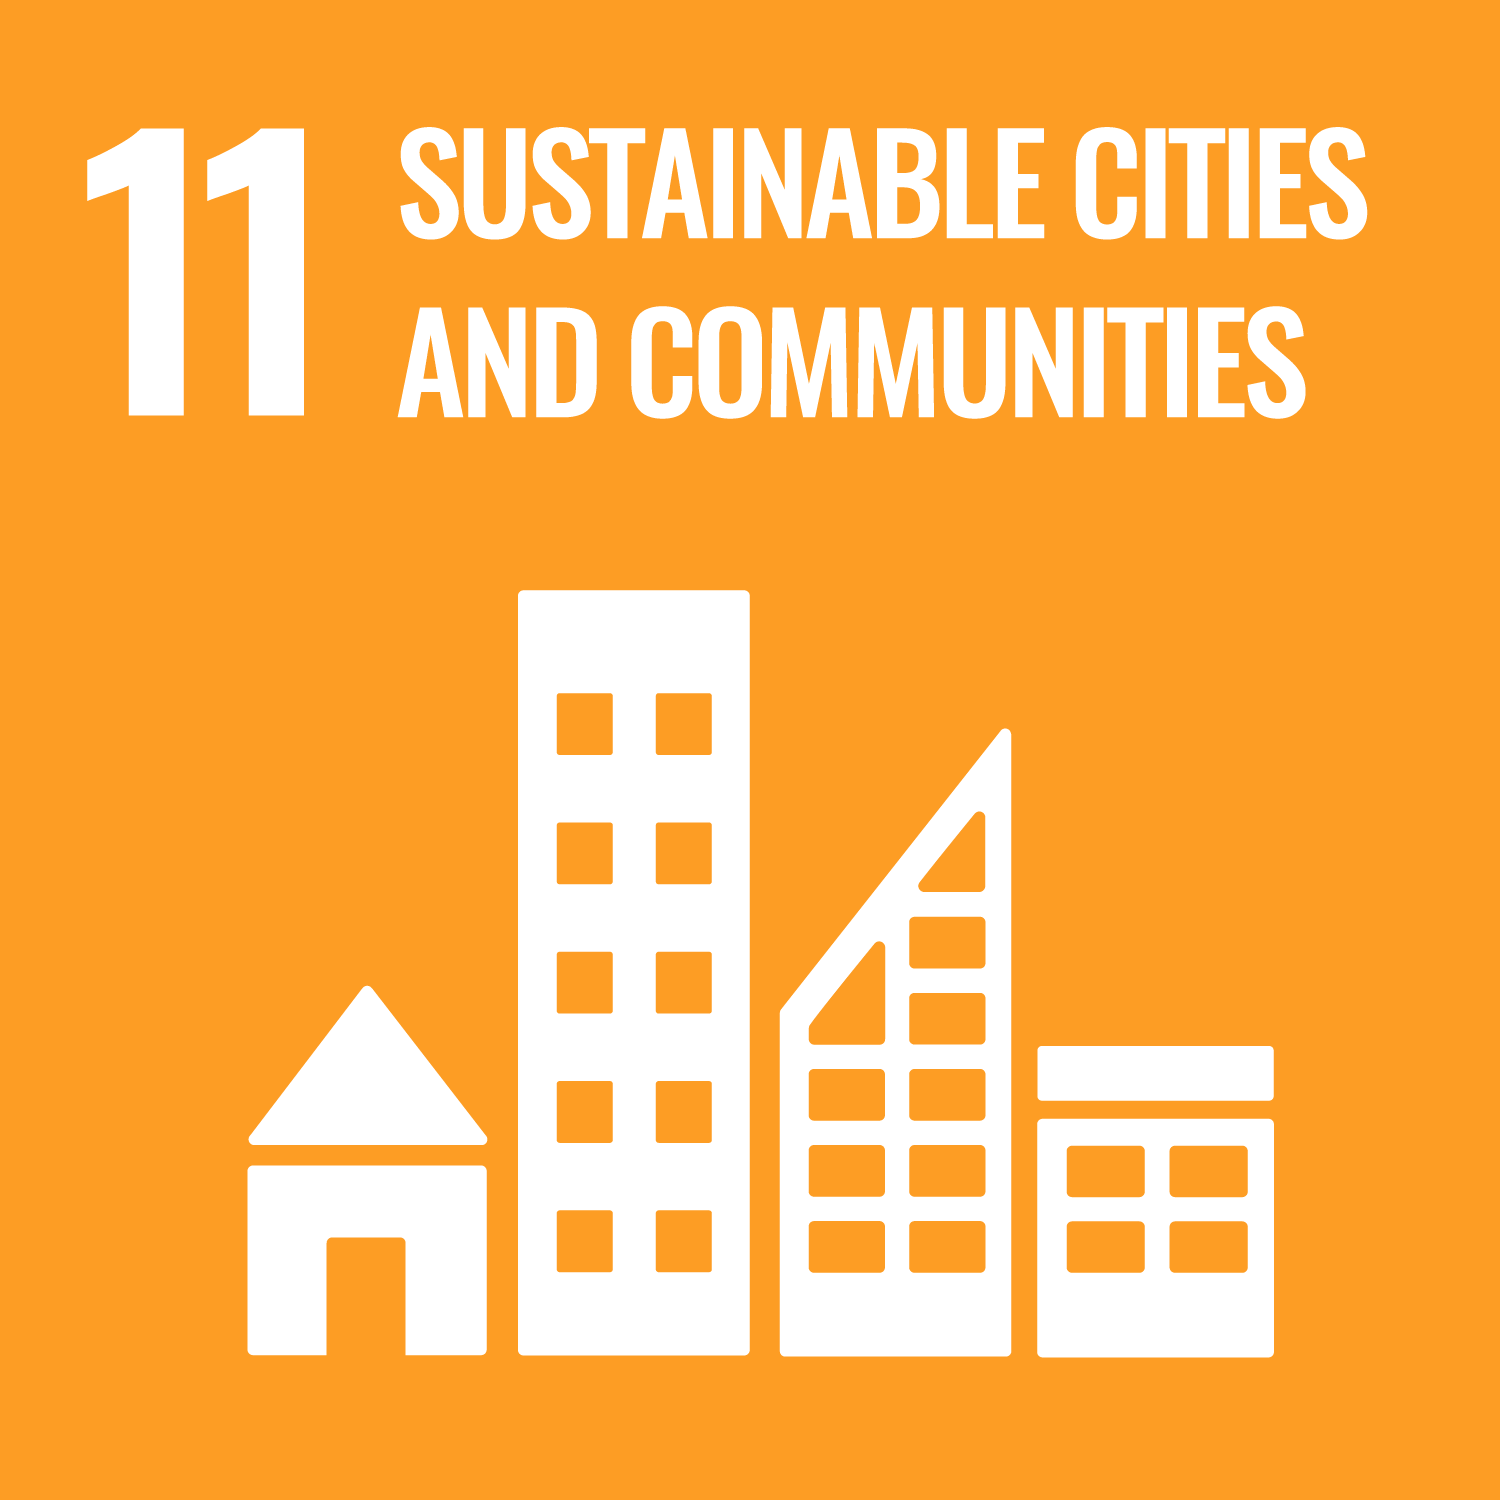 United Nations Sustainable Development Goal Icon - Goal #11, sustainable cities and communities